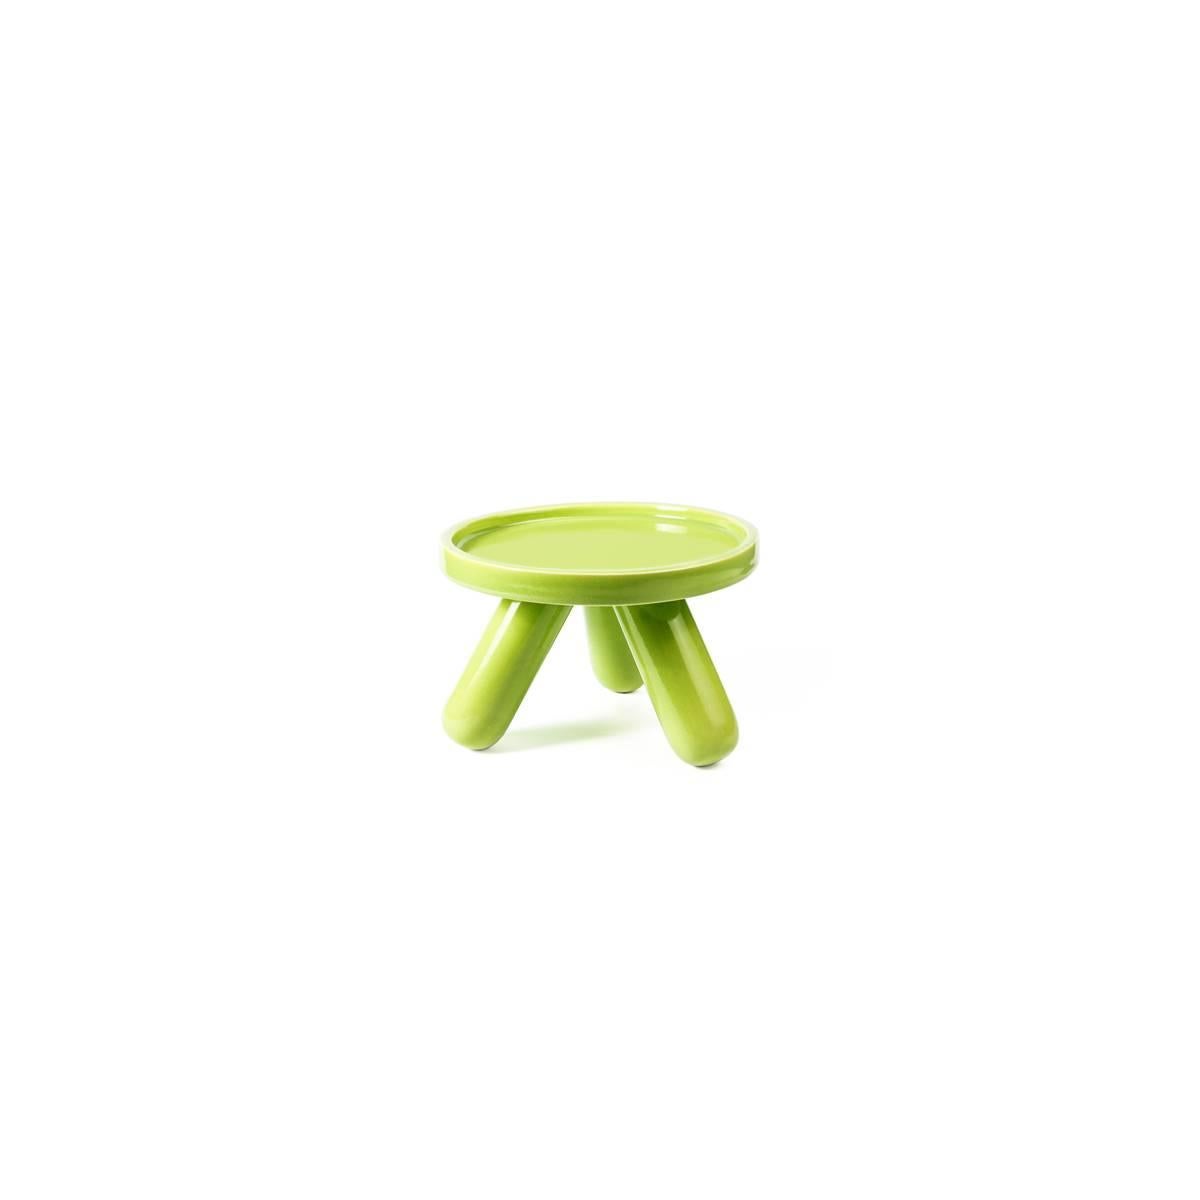 Gambino is a ceramic riser designed by Aldo Cibic, it is available in two color versions (red and green). The product is part of Table Joy Collection: an upbeat, vividly colored and ever so slightly radical family of tableware that can be